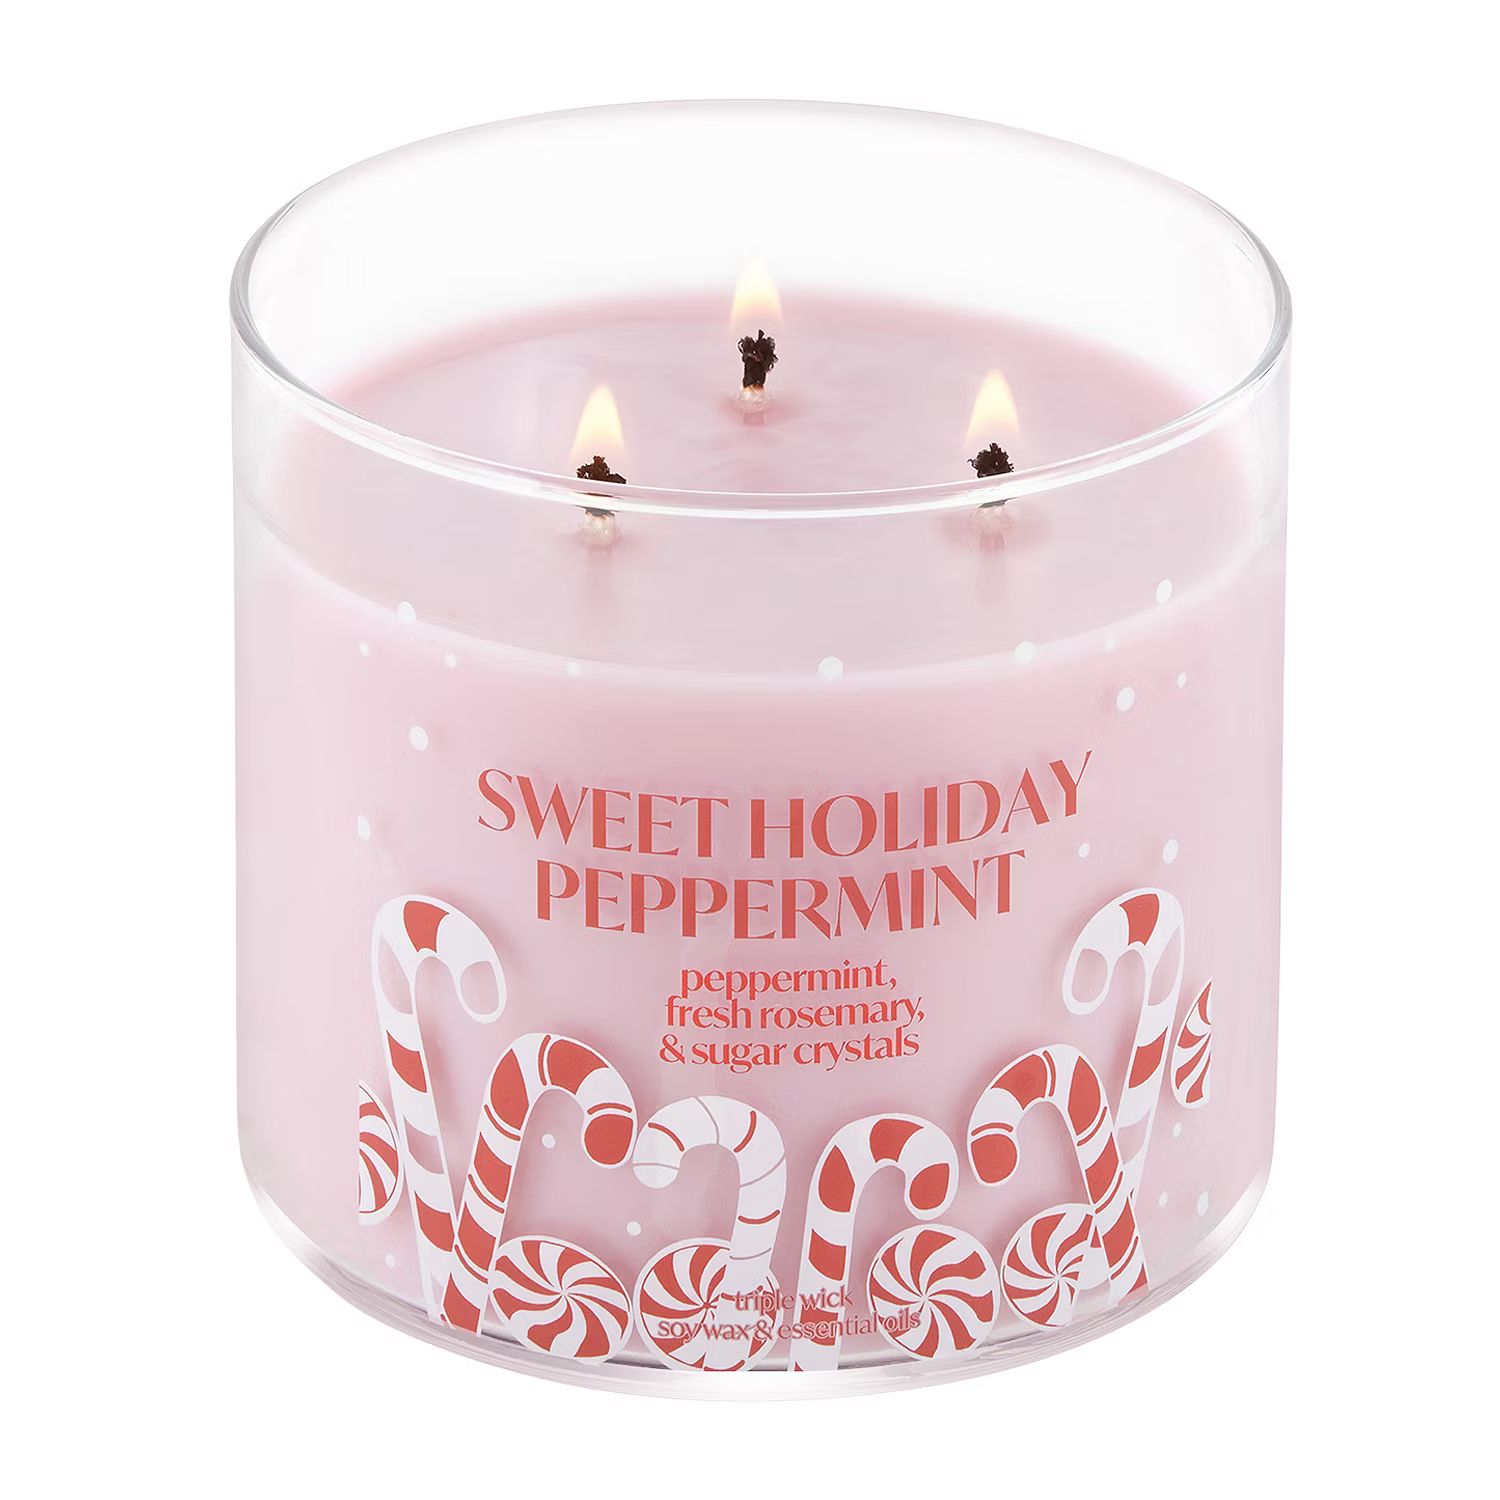 Distant Lands 14 Oz 3 Wick Sweet Holiday Peppermint Scented Jar Candle | JCPenney